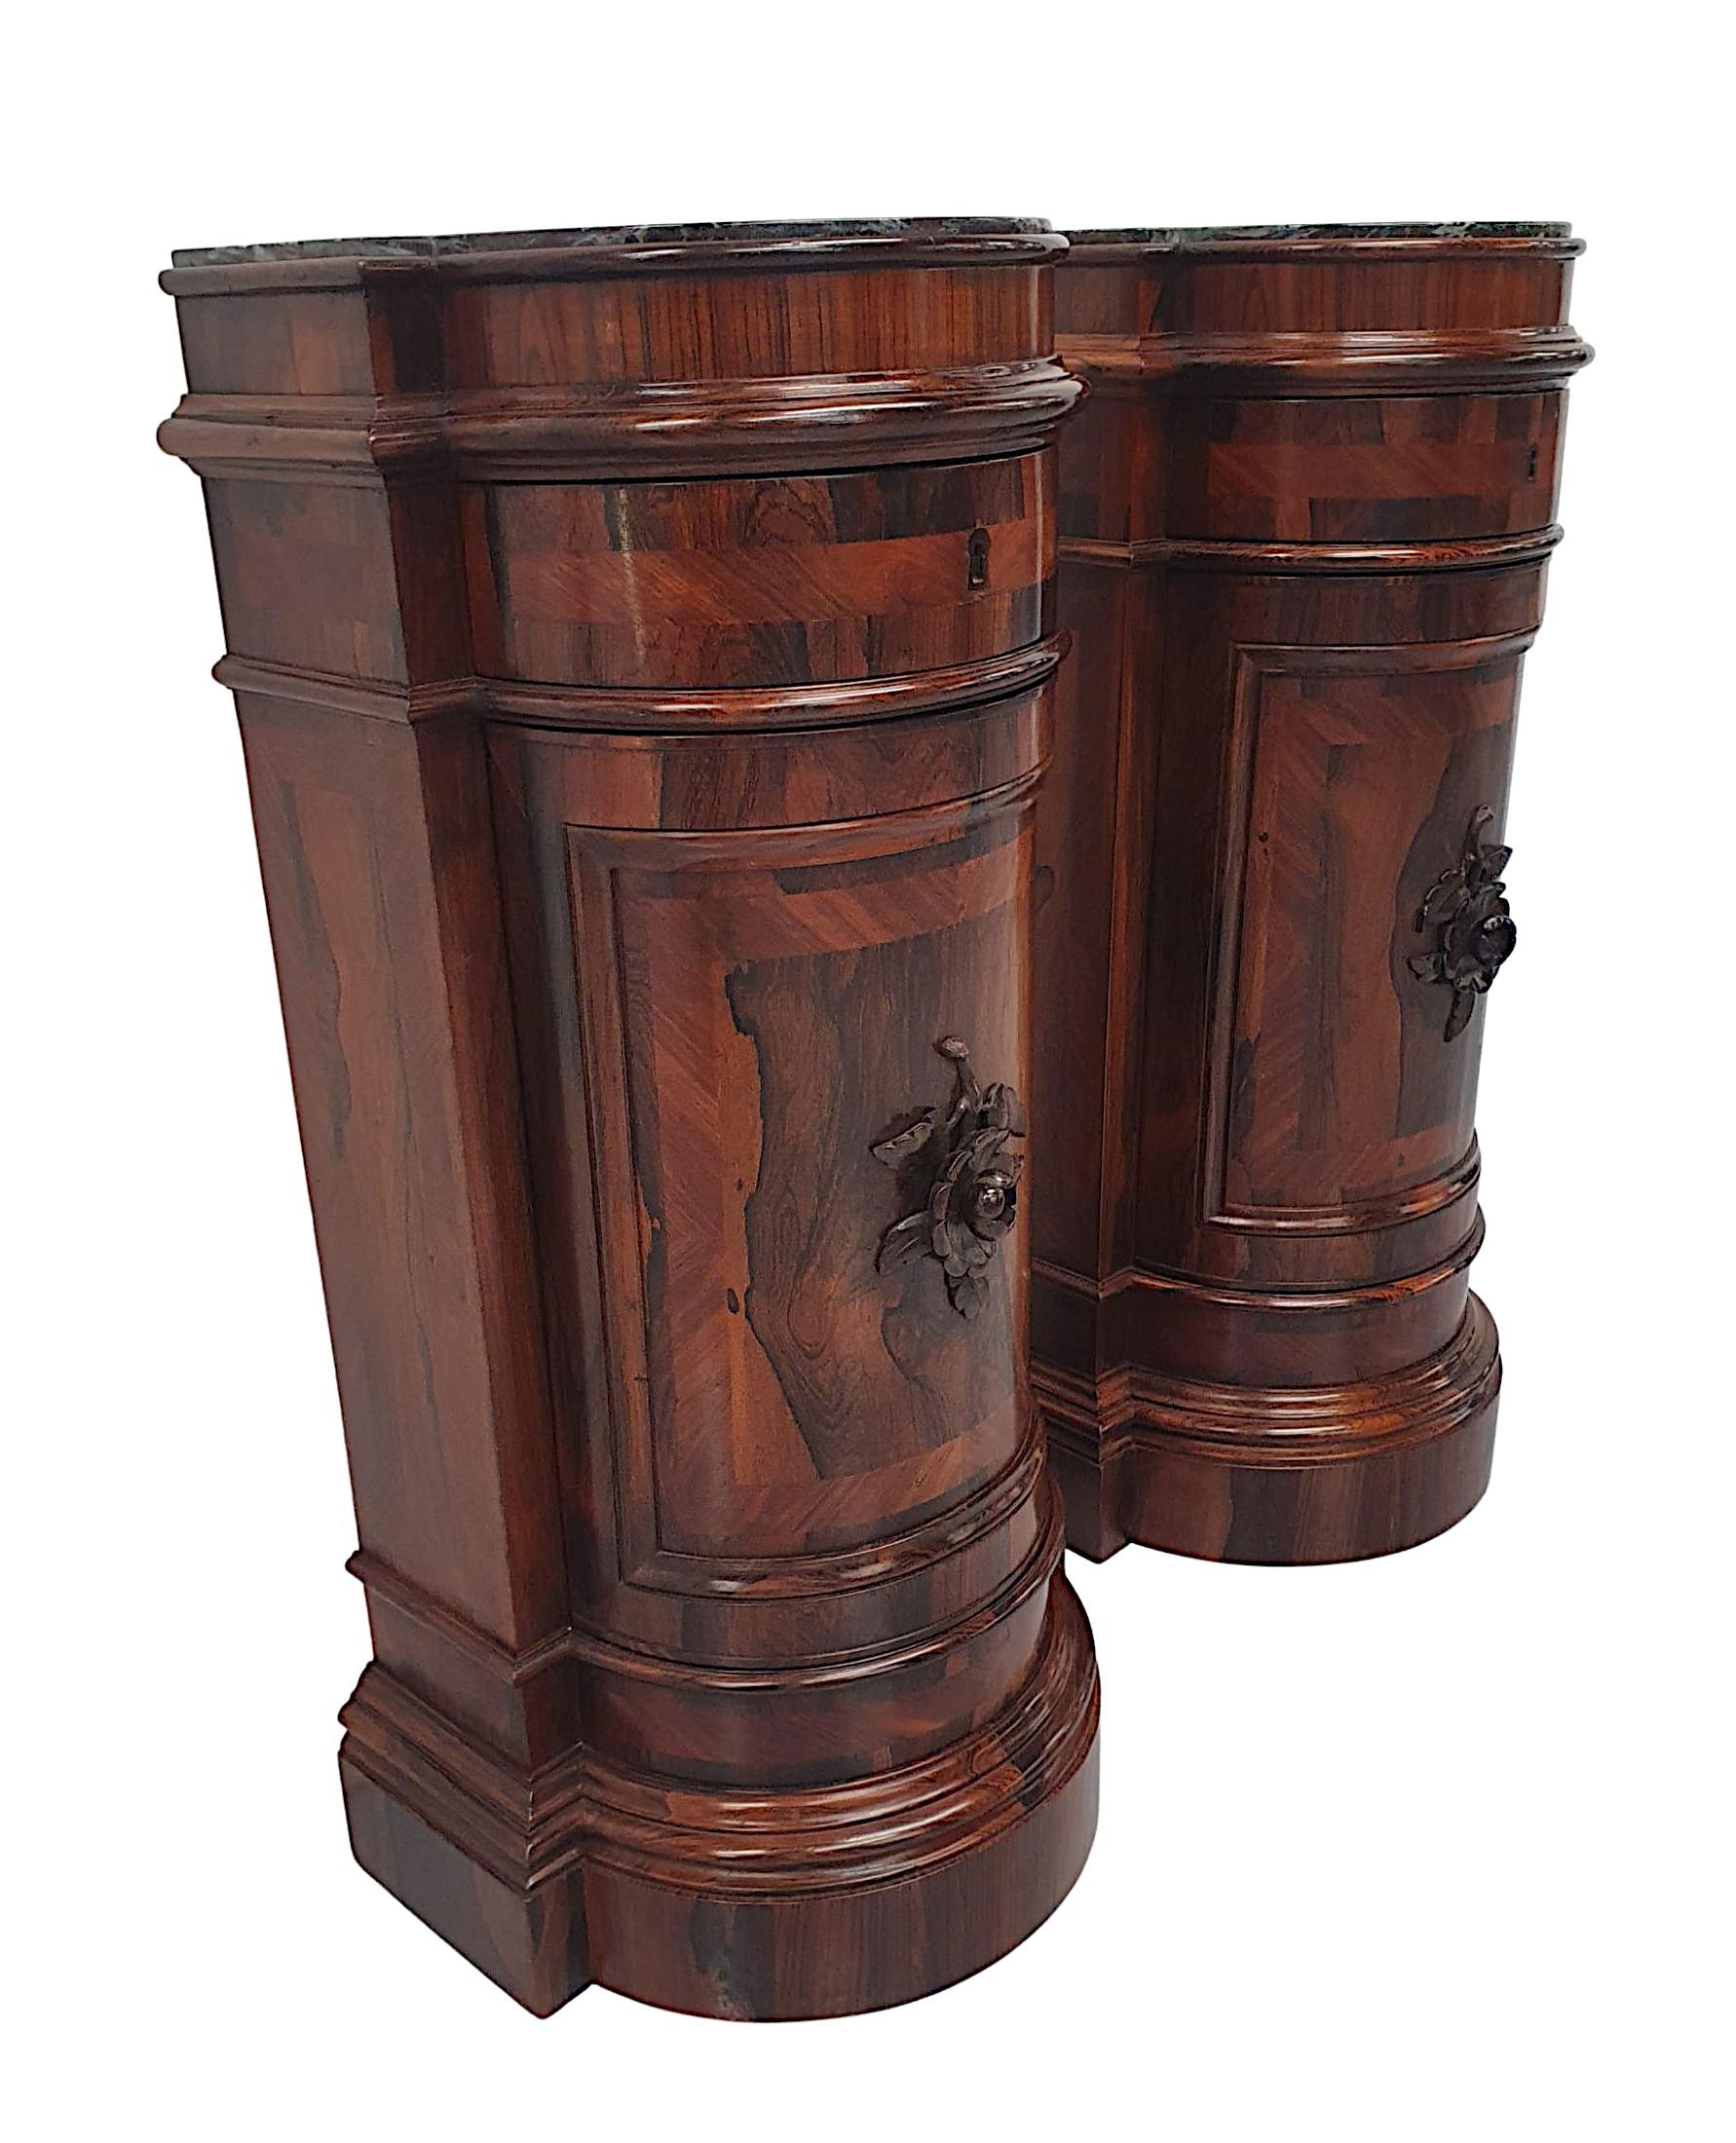 A very fine pair of late 19th Century richly patinated, fruitwood marble top dome fronted plinths or side cabinets. Fabulously hand carved and crossbanded throughout, the gorgeous moulded Marquina Black marble top is raised over a simple, panelled